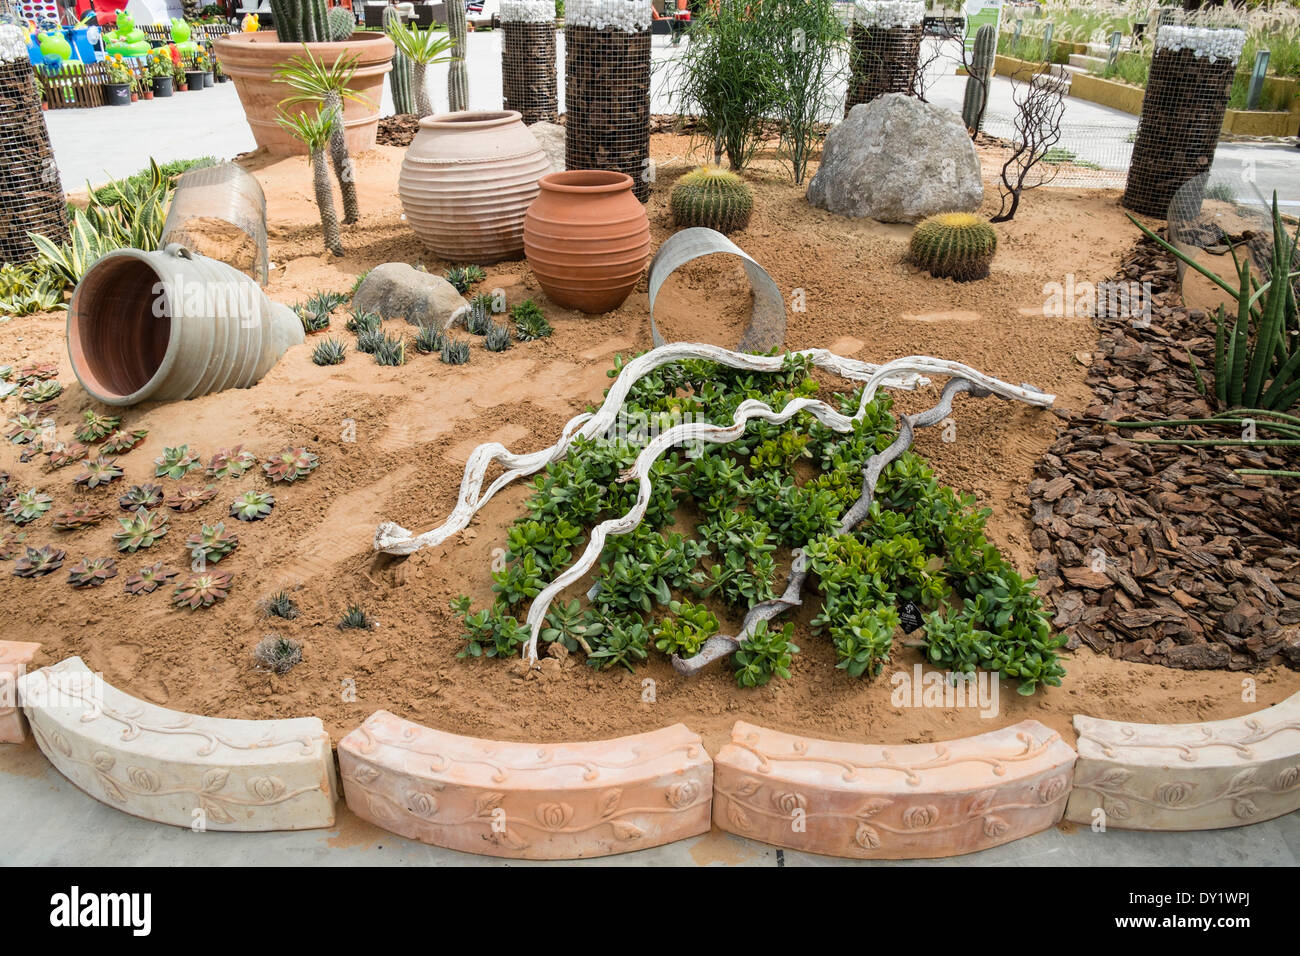 Dubai, United Arab Emirates. 3rd April 2014. The opening day of the first Dubai International Garden Competition. This is Burj Sahara garden based on low maintenance in hot desert climate Credit:  Iain Masterton/Alamy Live News Stock Photo